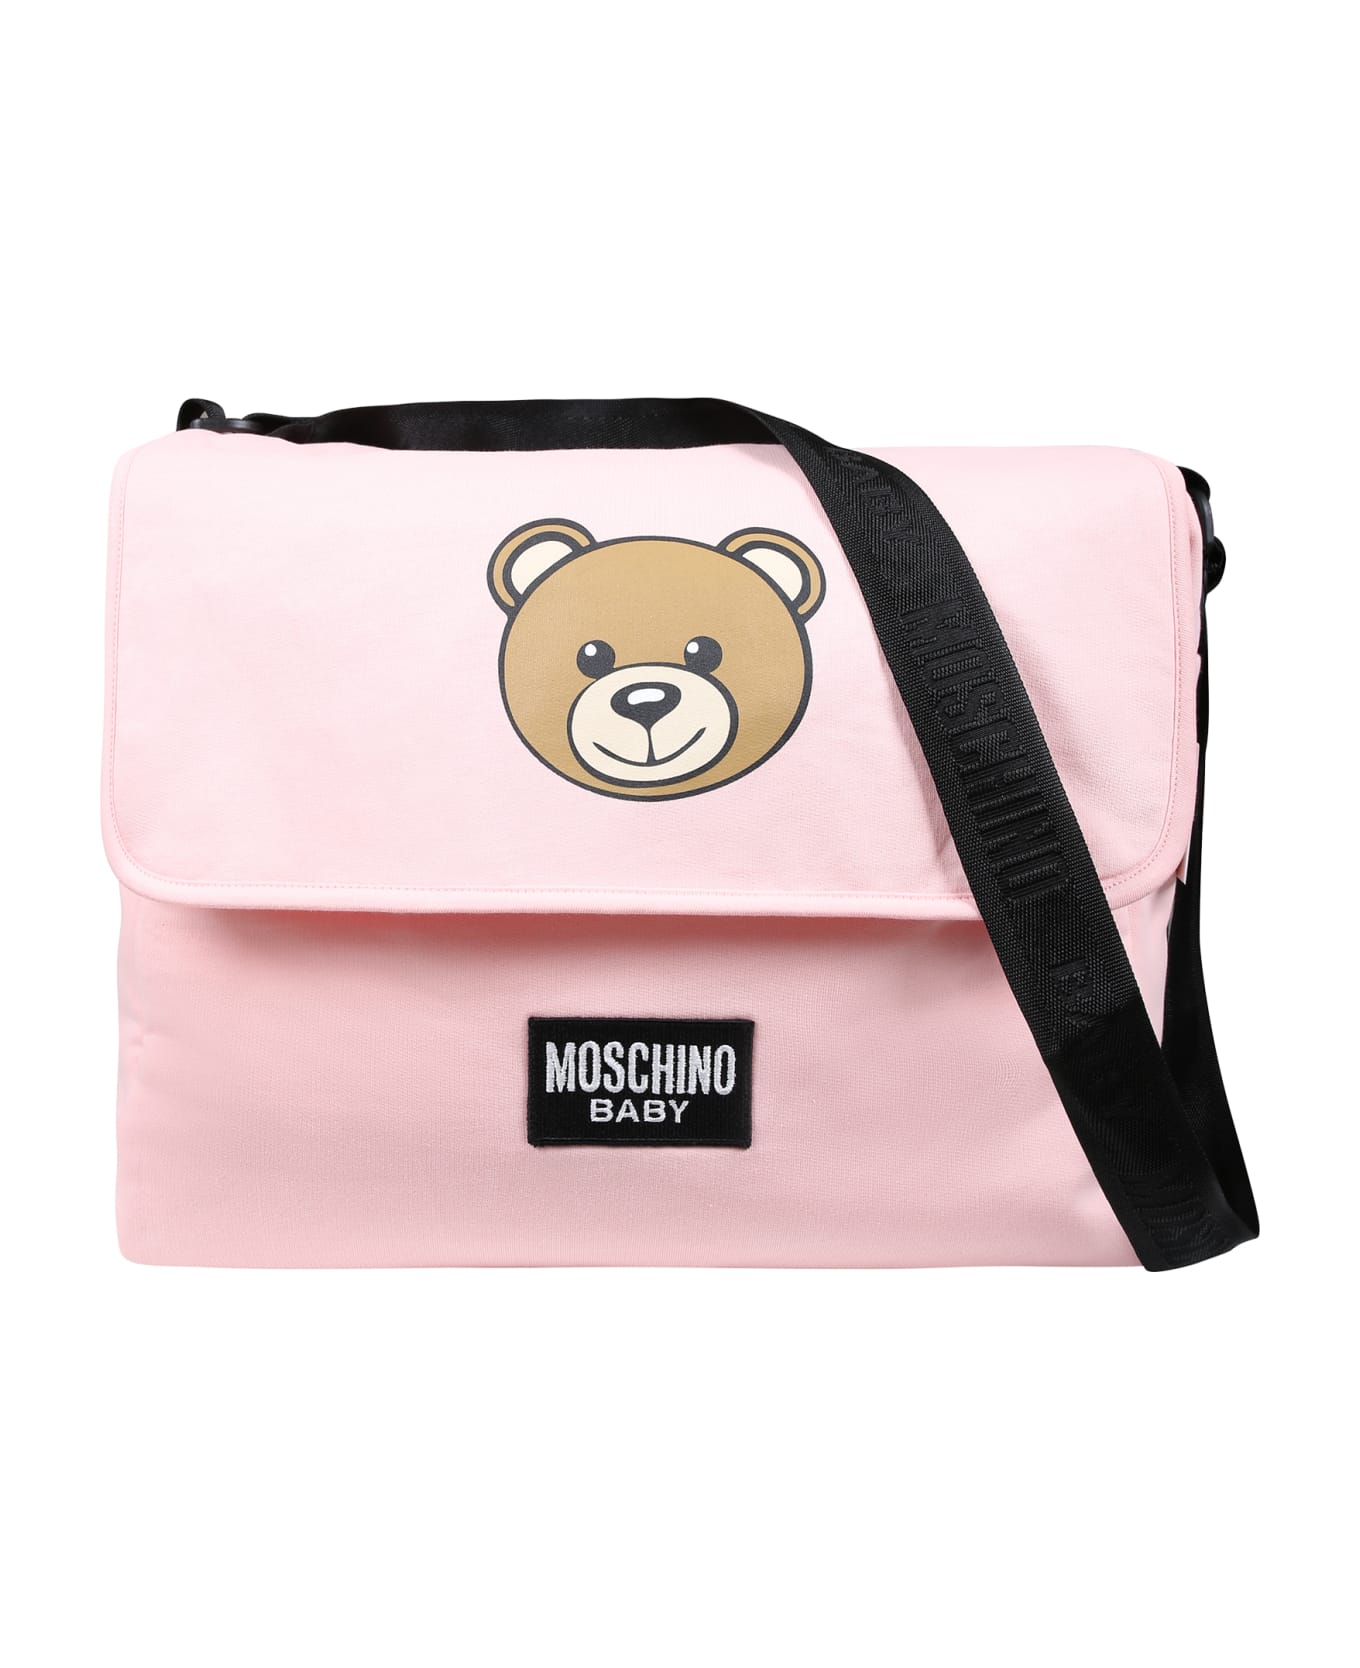 Moschino Pink Mother Bag For Baby Boy With Teddy Bear And Logo - Pink